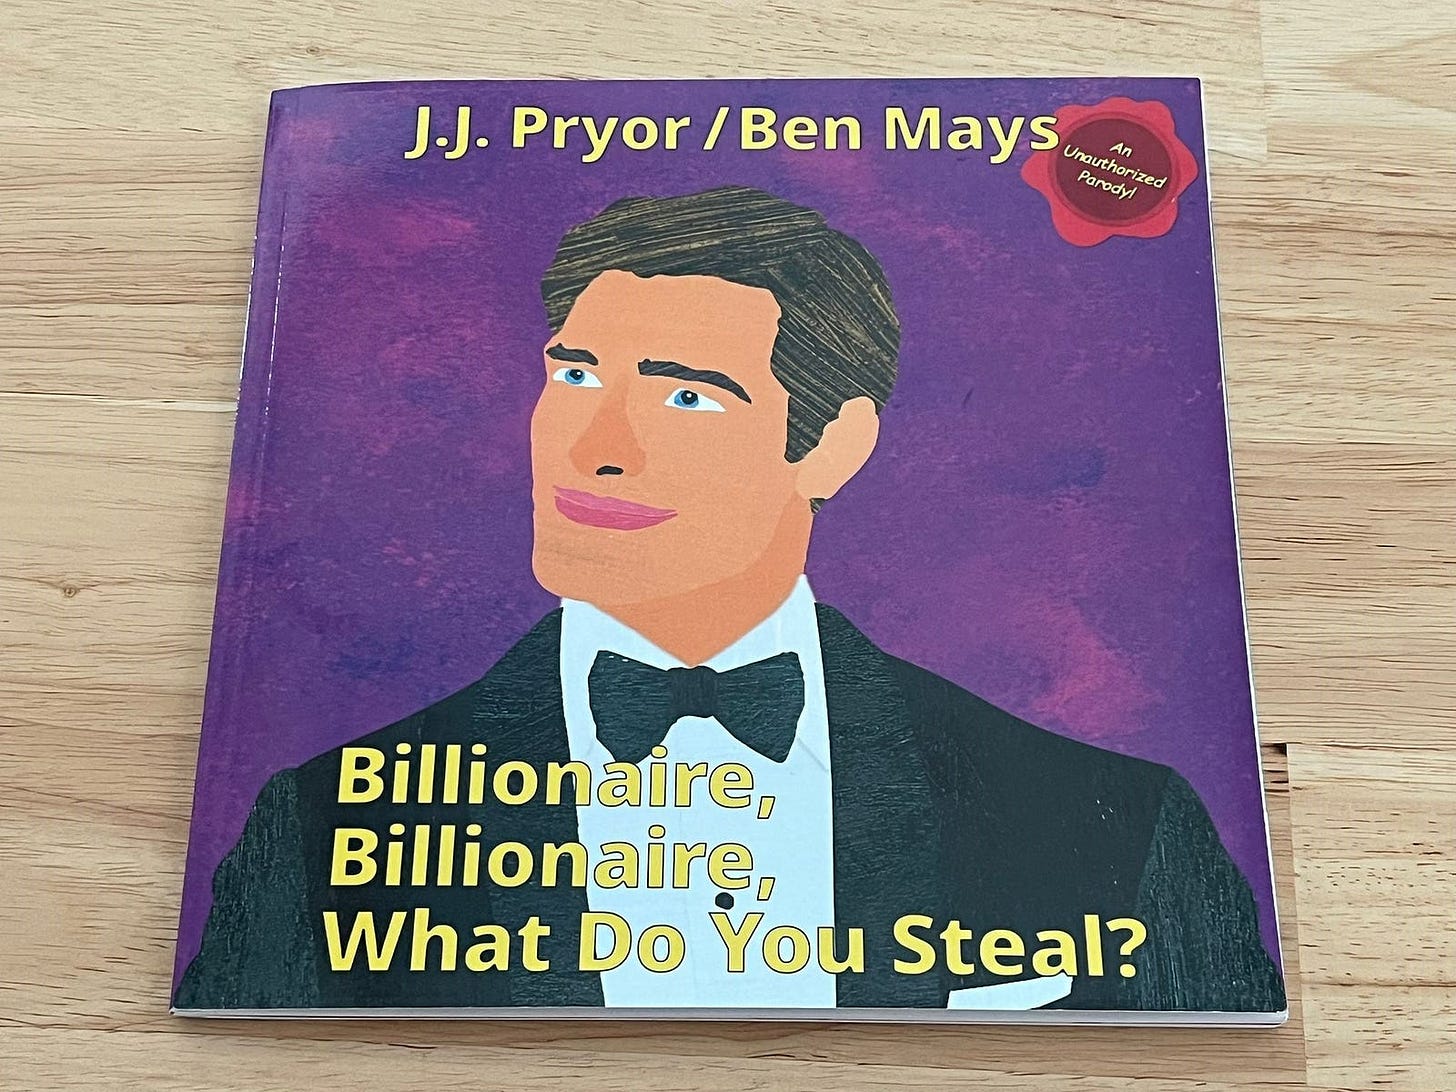 Billionaire Billionaire What Do You Steal book cover on a desk